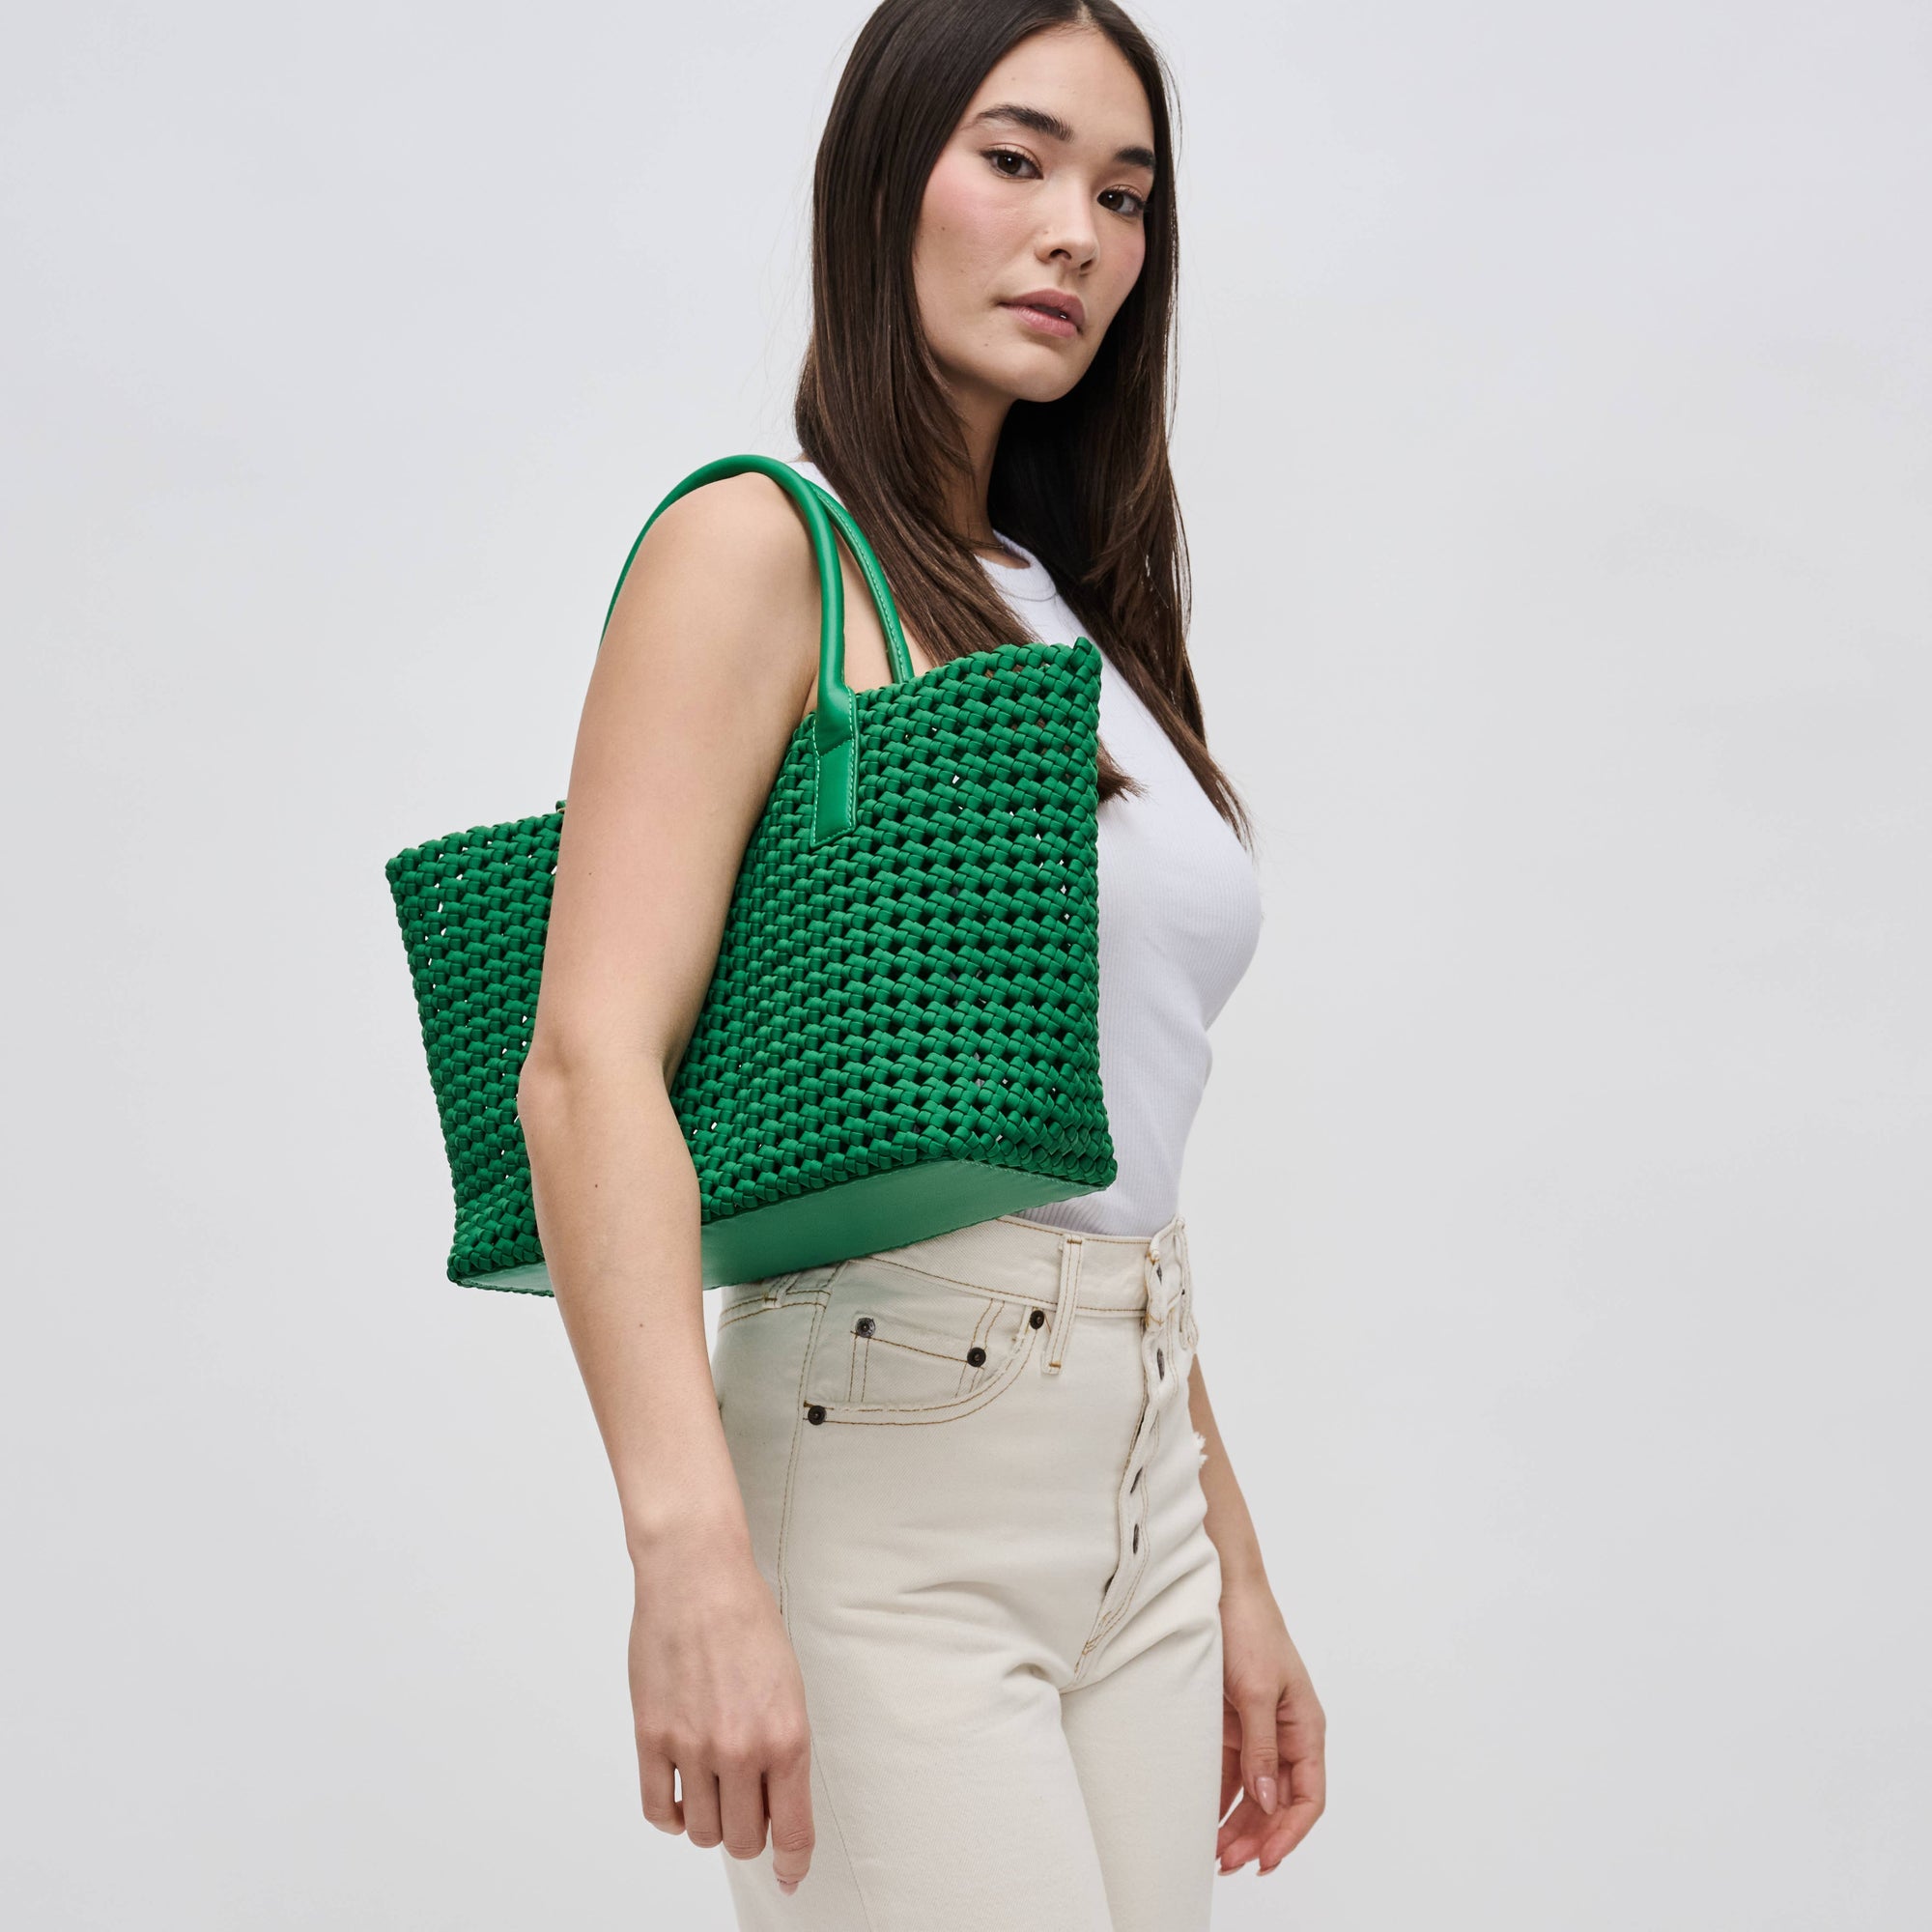 Solstice - Medium  Hand Woven Knot Tote: Kelly Green